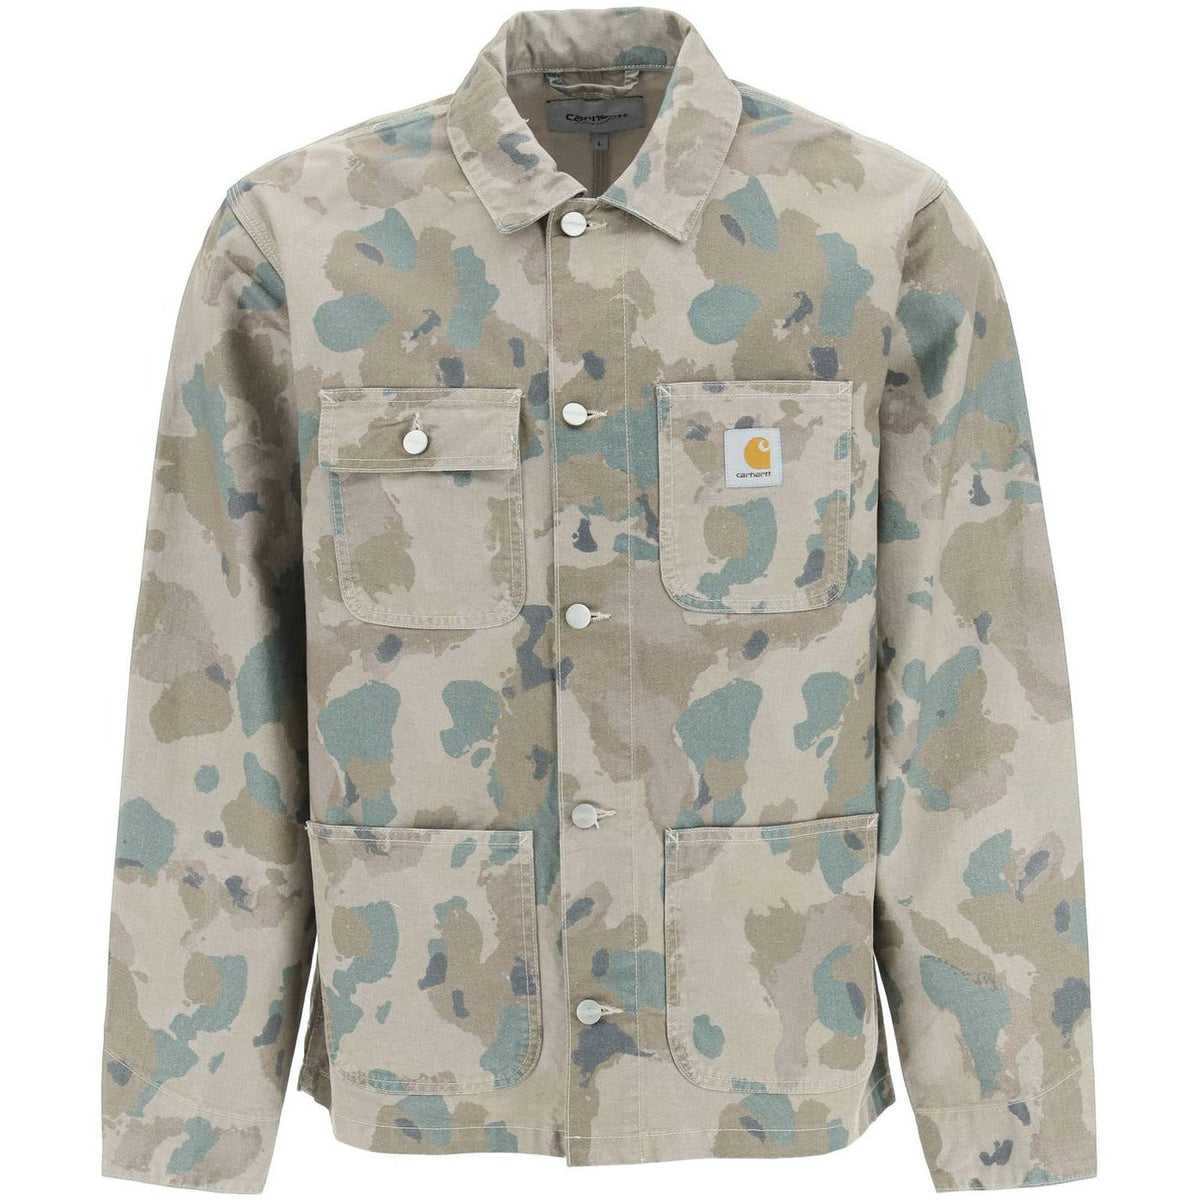 Carhartt wip michigan jacket in camouflage drill